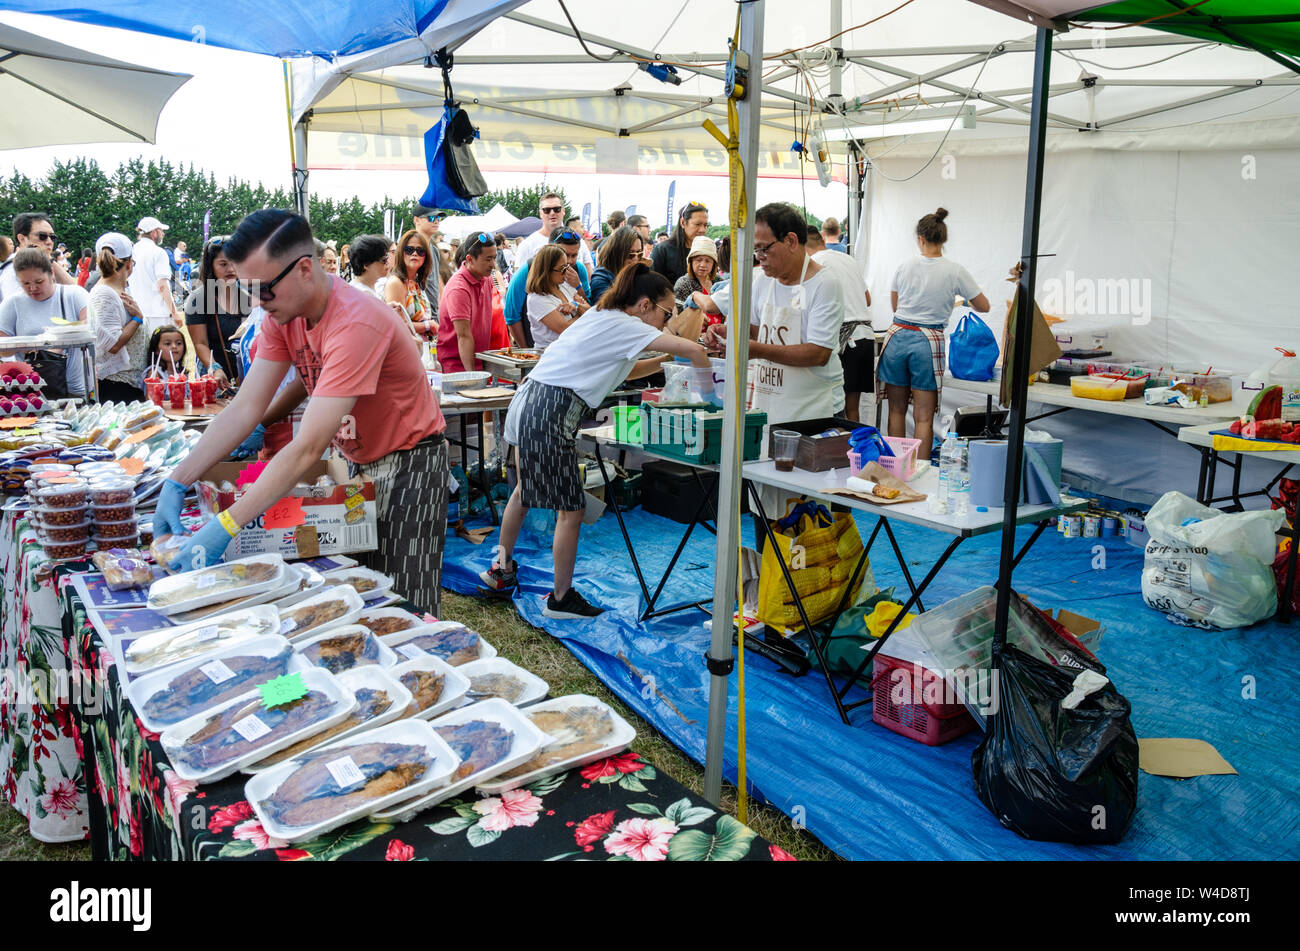 A stall selling Filipino foods at a Filipino cultural event in London. Stock Photo